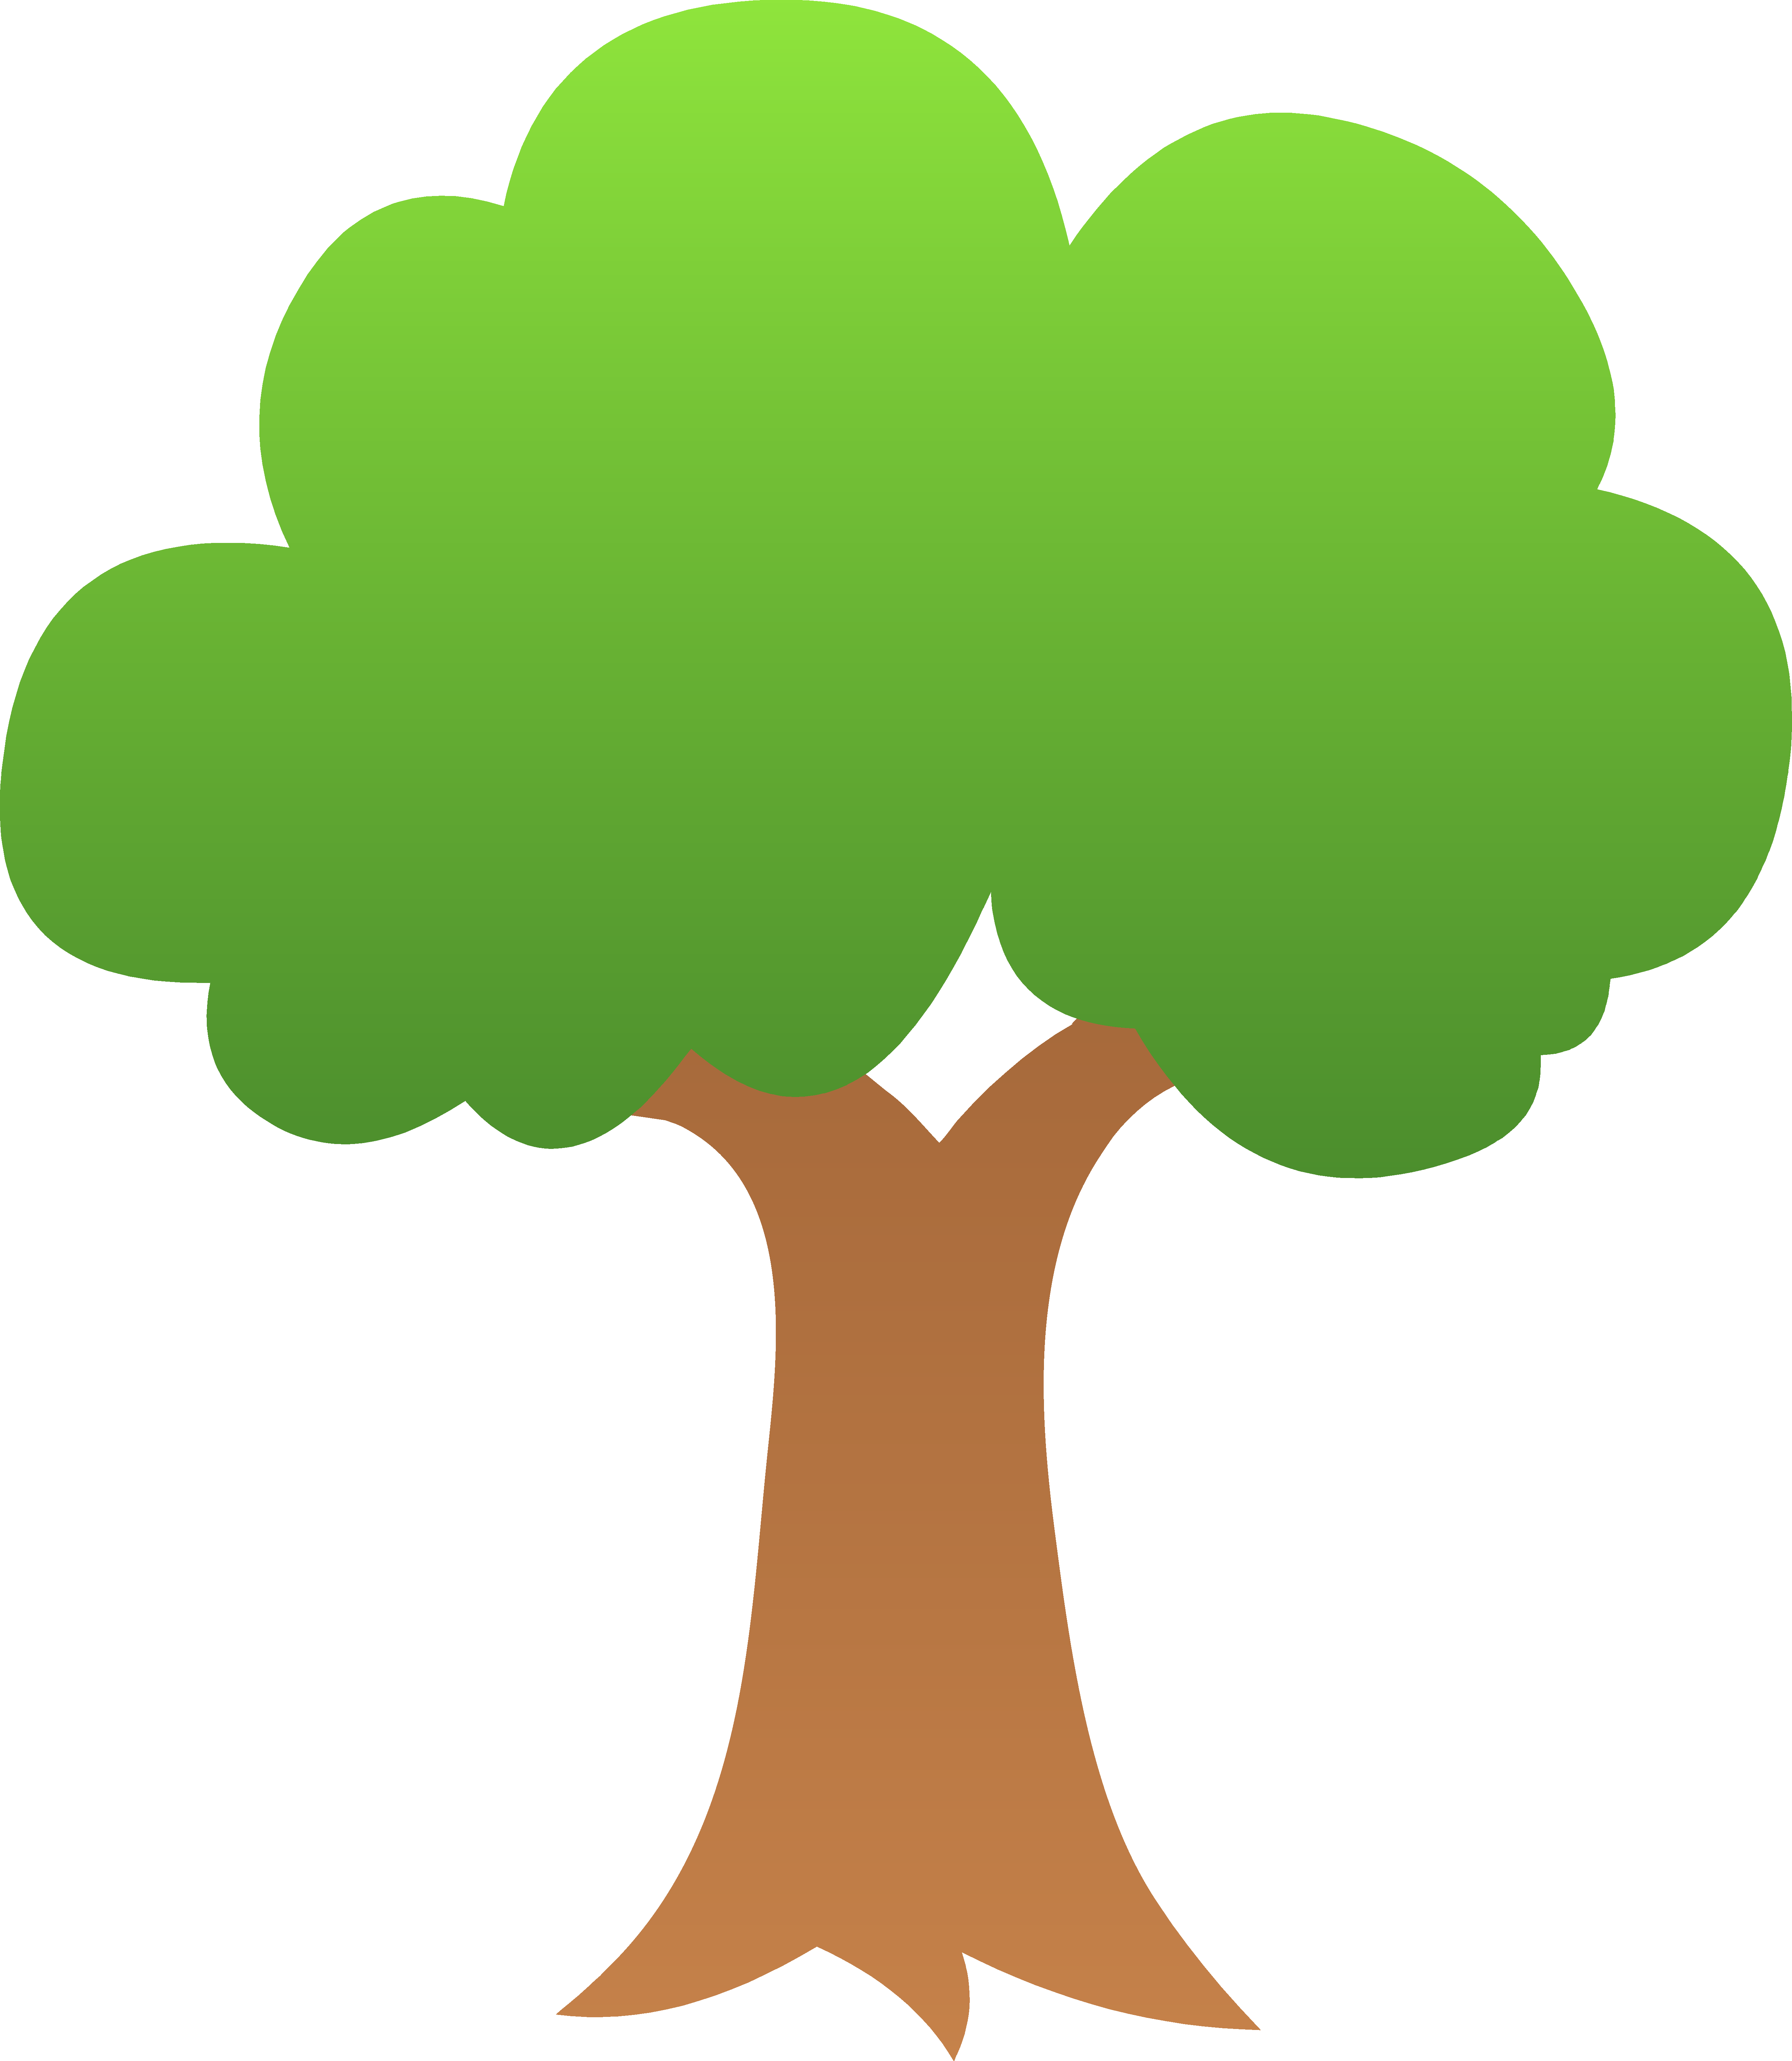 Large green tree clipart tree art trees and green - Clipartix